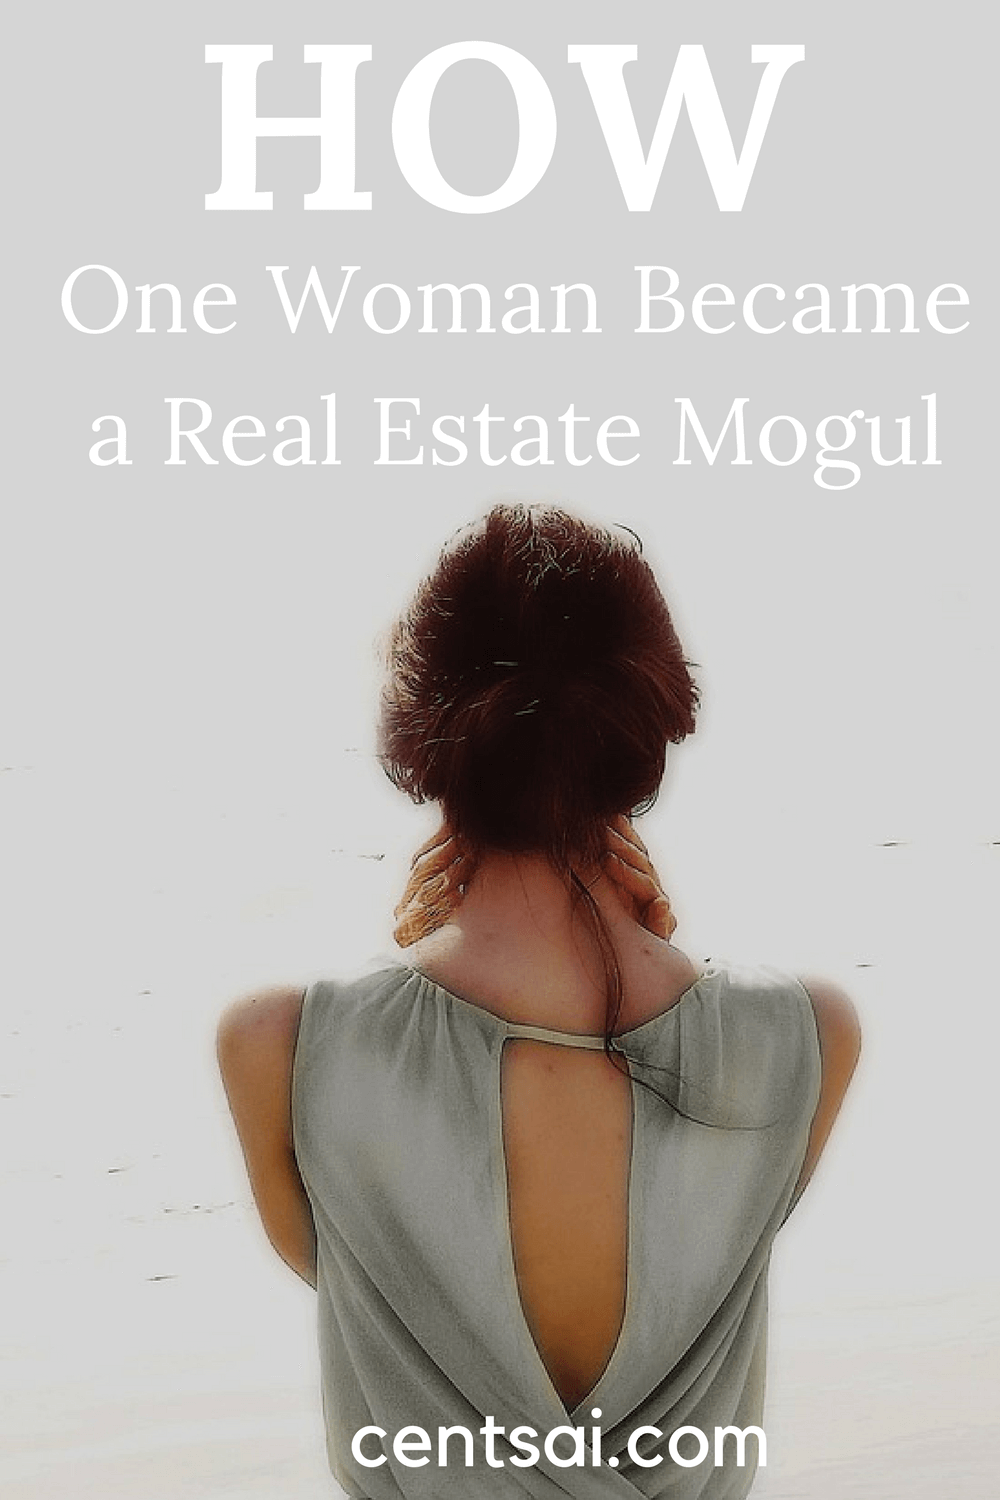 How One Woman Became a Real Estate Mogul